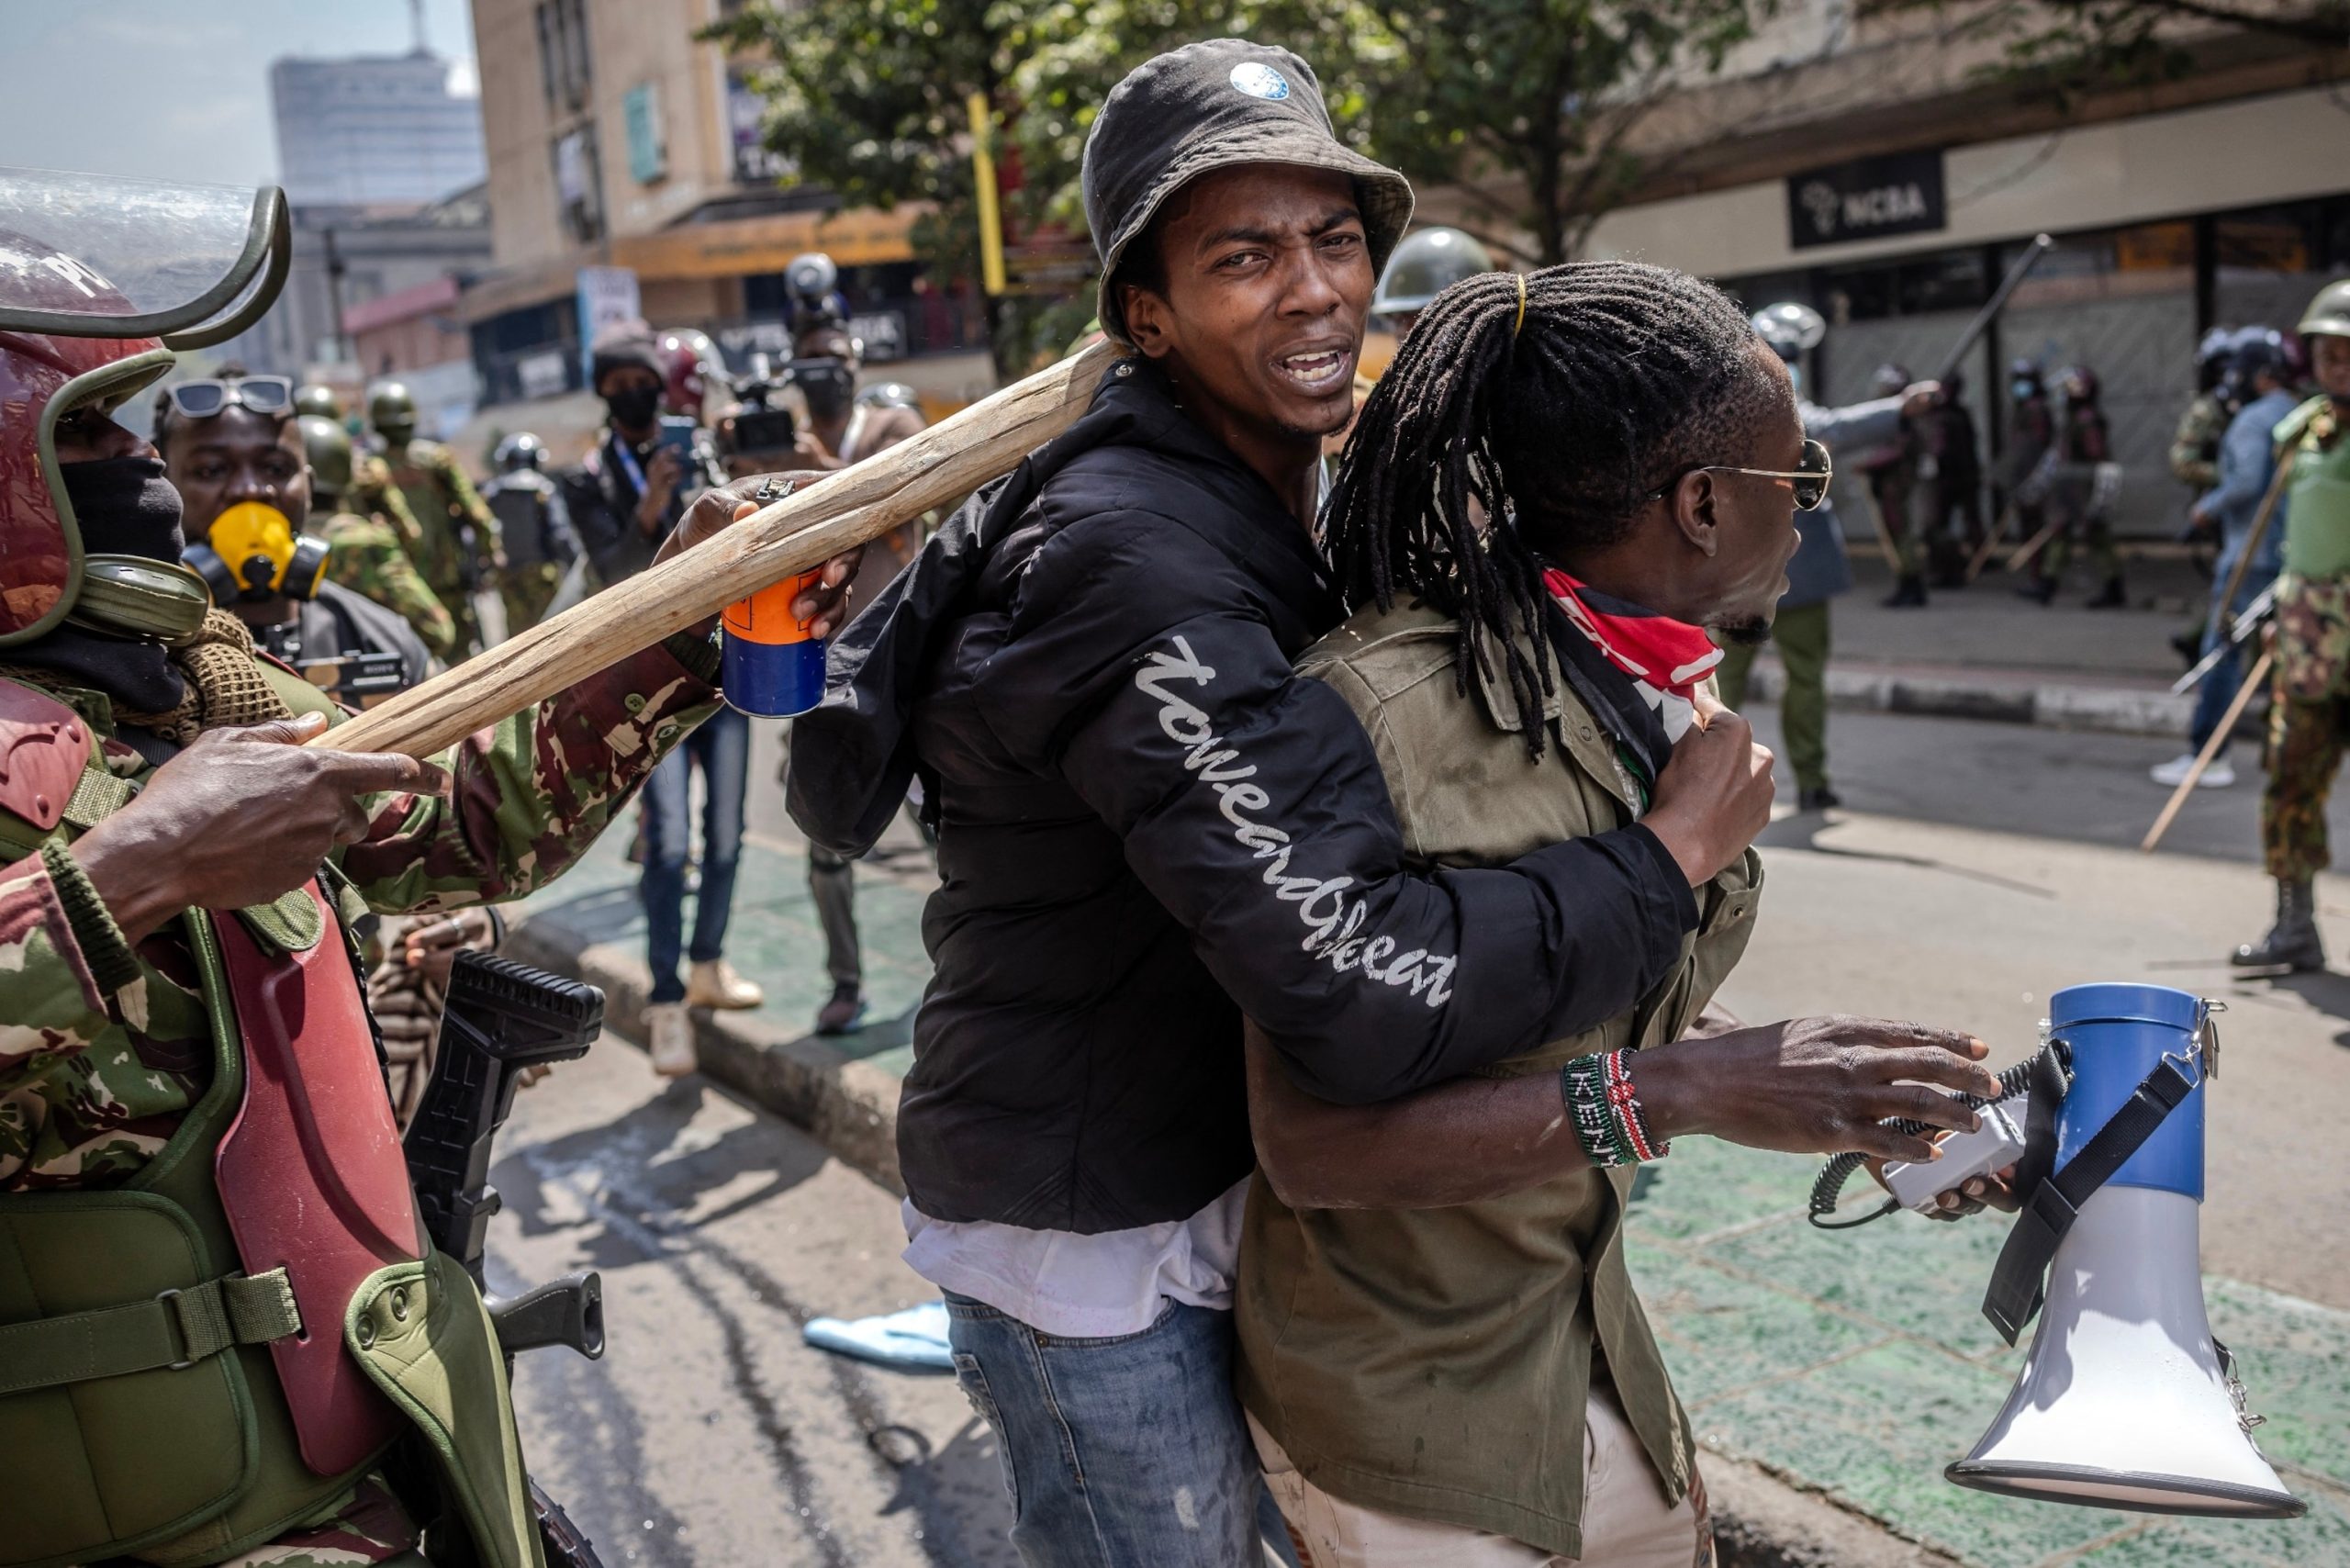 Police clash with anti-tax protesters in Kenya results in multiple deaths